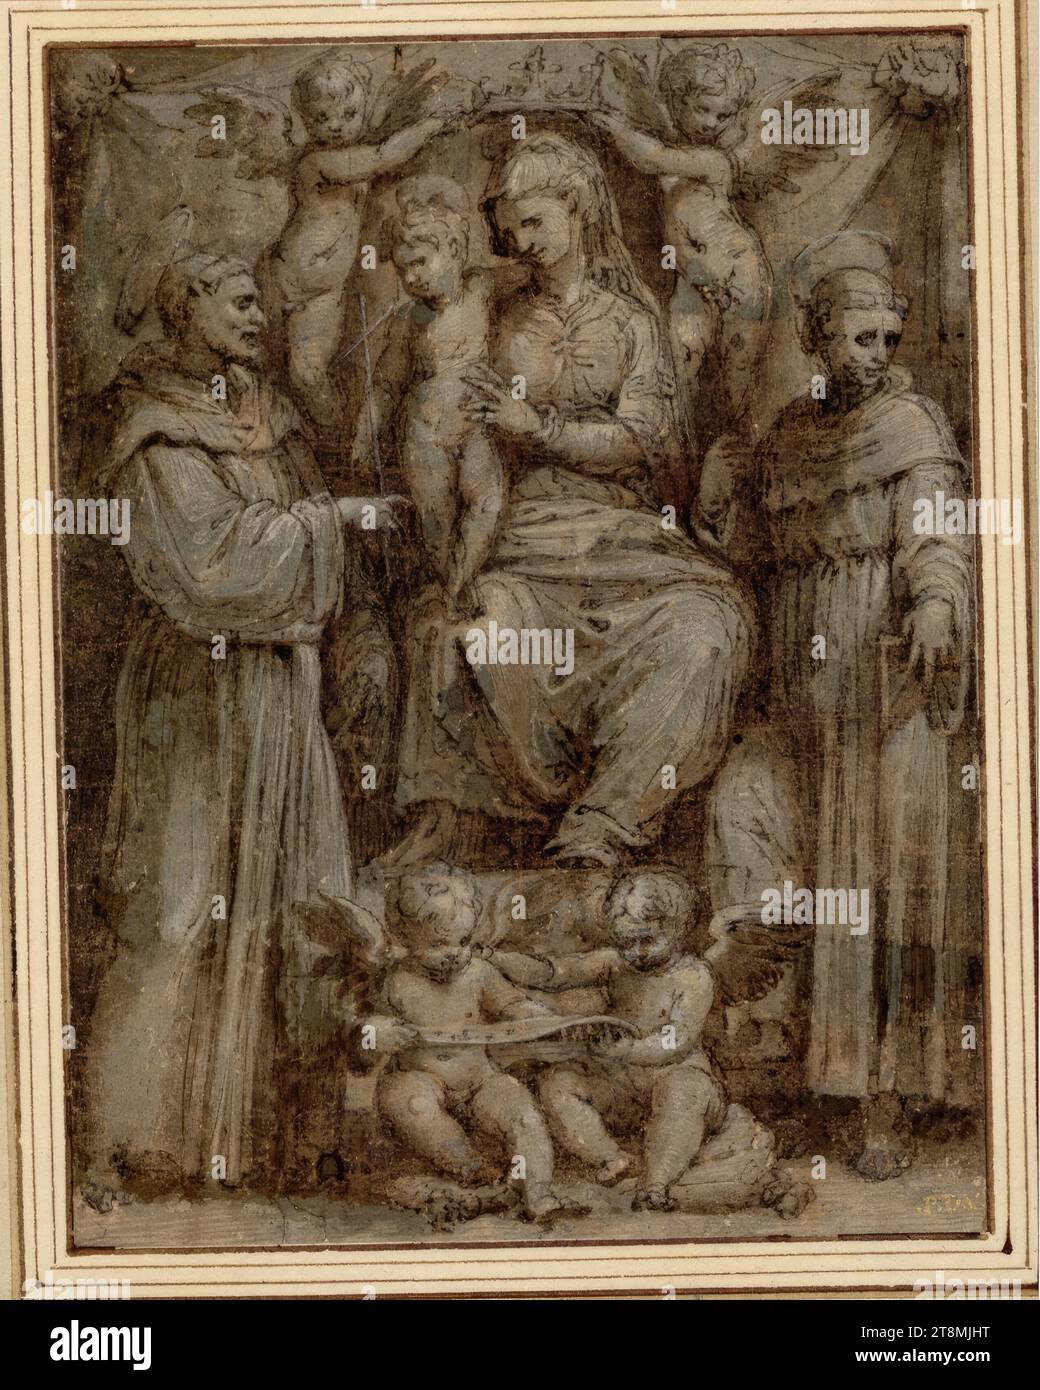 Sacra Conversazione, Piero Buonaccorsi called Perino del Vaga (Florence 1501 - 1547 Rome), drawing, pen; washed; heightened with white; blue-grey paper; holey; partially supplemented, 19.2 x 14.6 cm, l.l. Duke Albert of Saxe-Teschen, in the lower right corner 'P.D.V.' in gold lettering Stock Photo